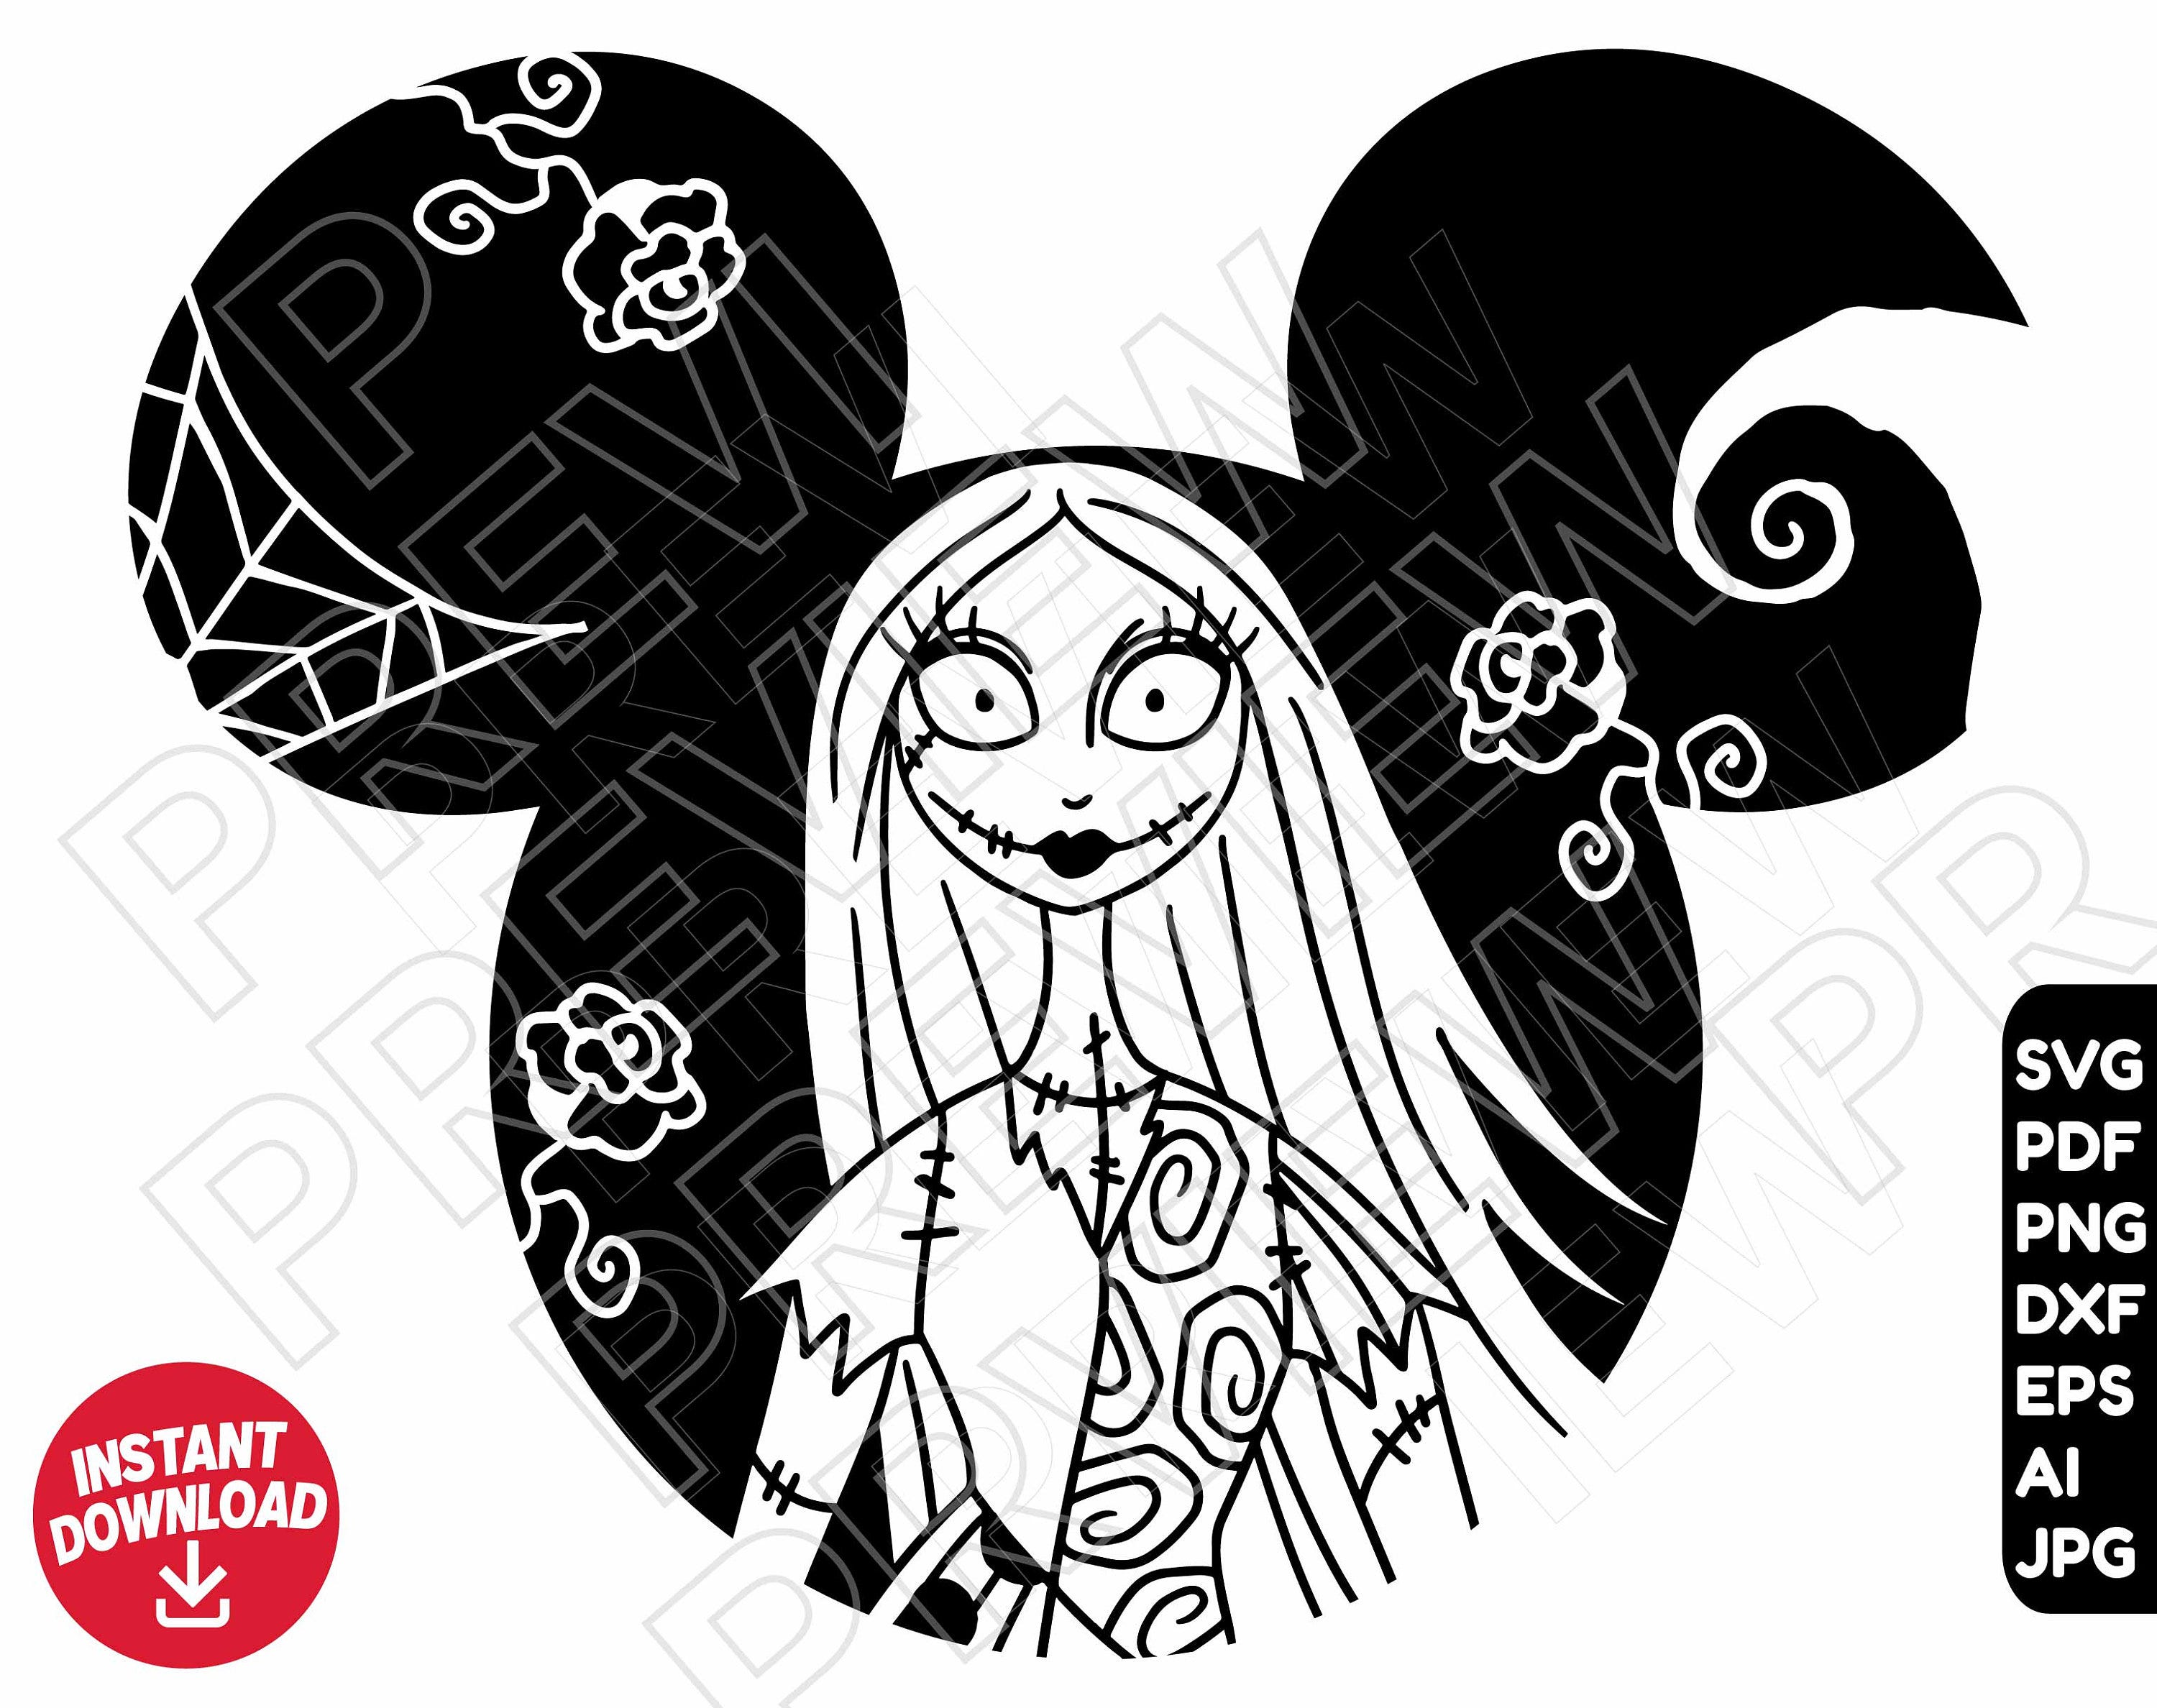 The Nightmare Before Christmas Sally SVG png clipart , Halloween SVG , cut file outline silhouette